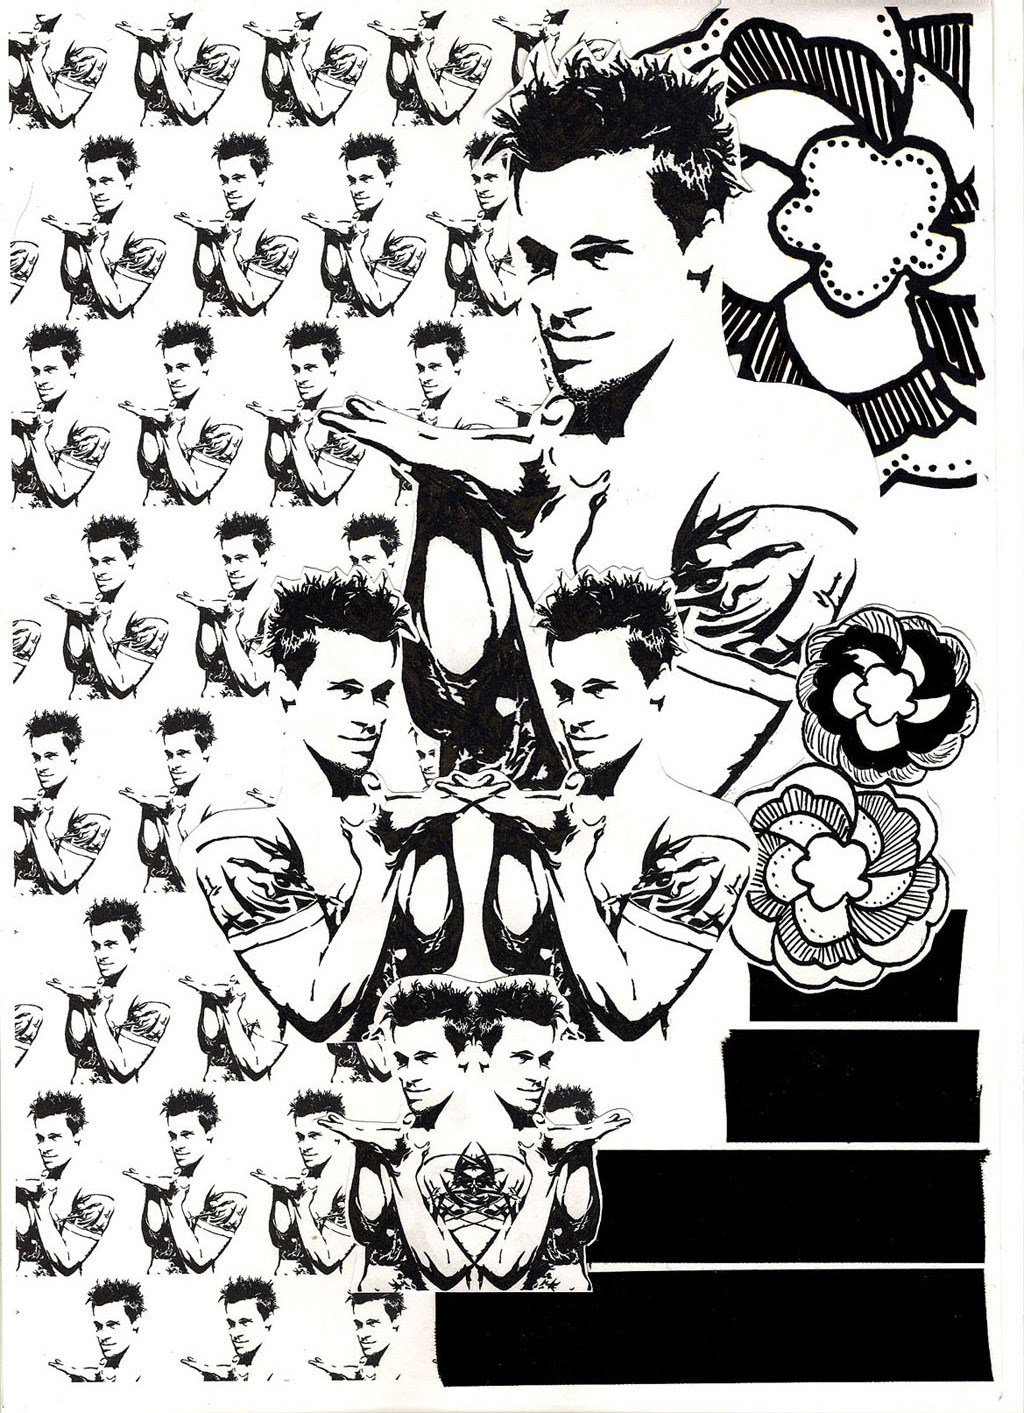 fight club poster postcard photocopy duct tape pen collage hand drawn typography